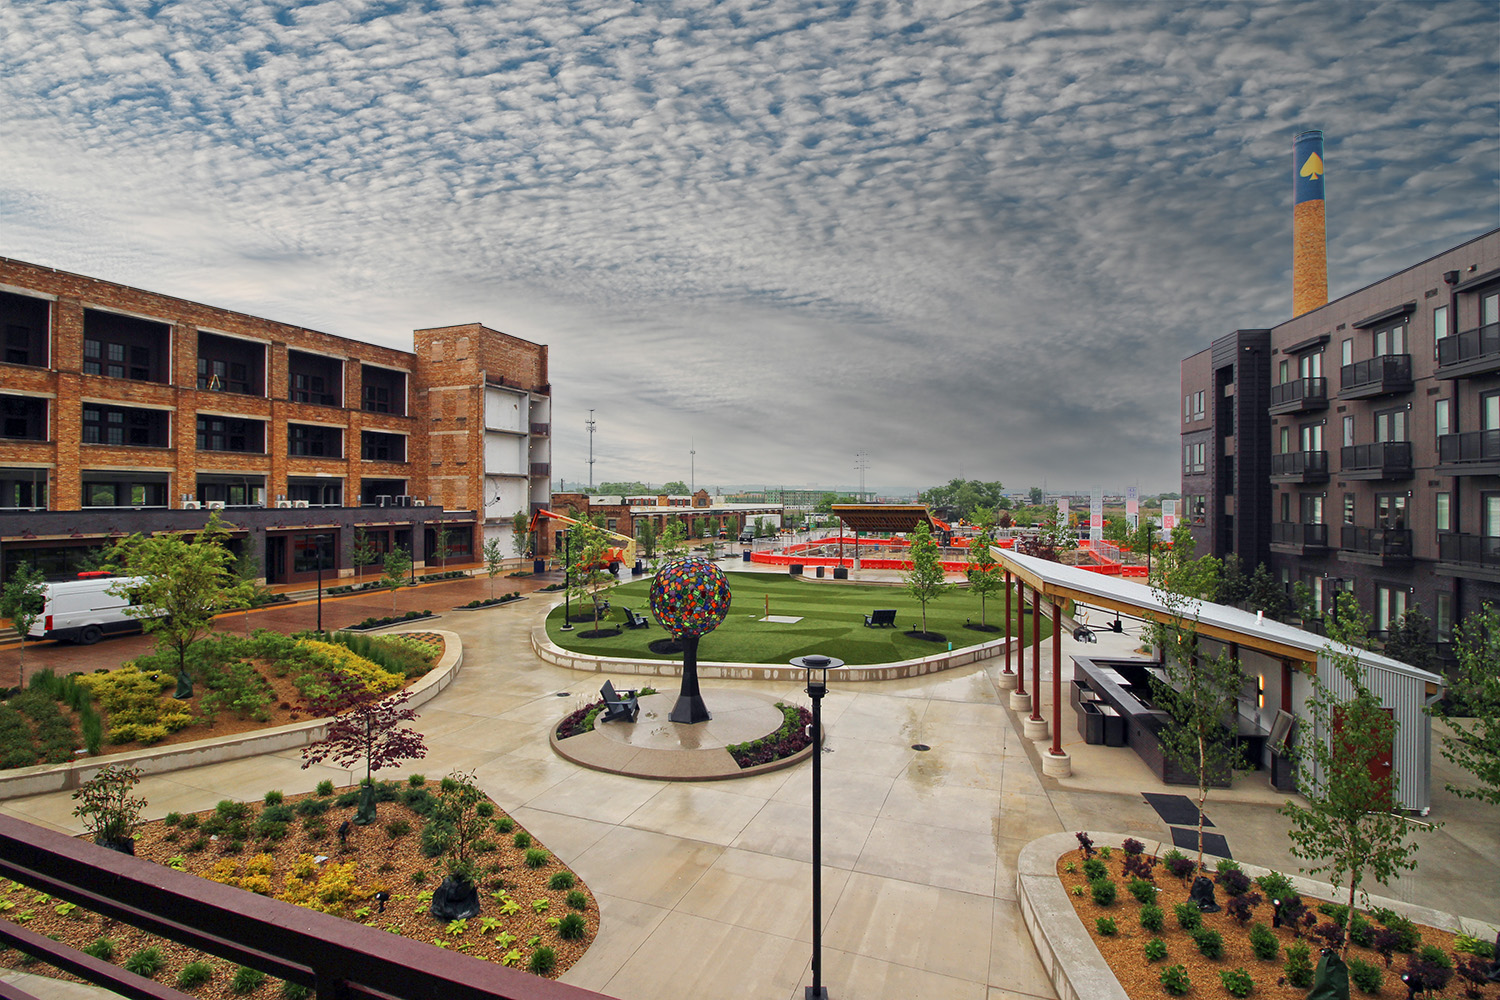 Image of a public square with a sculpture in the middle surrounded by brick buildings, landscaped planter beds, and a smokestack in the background.